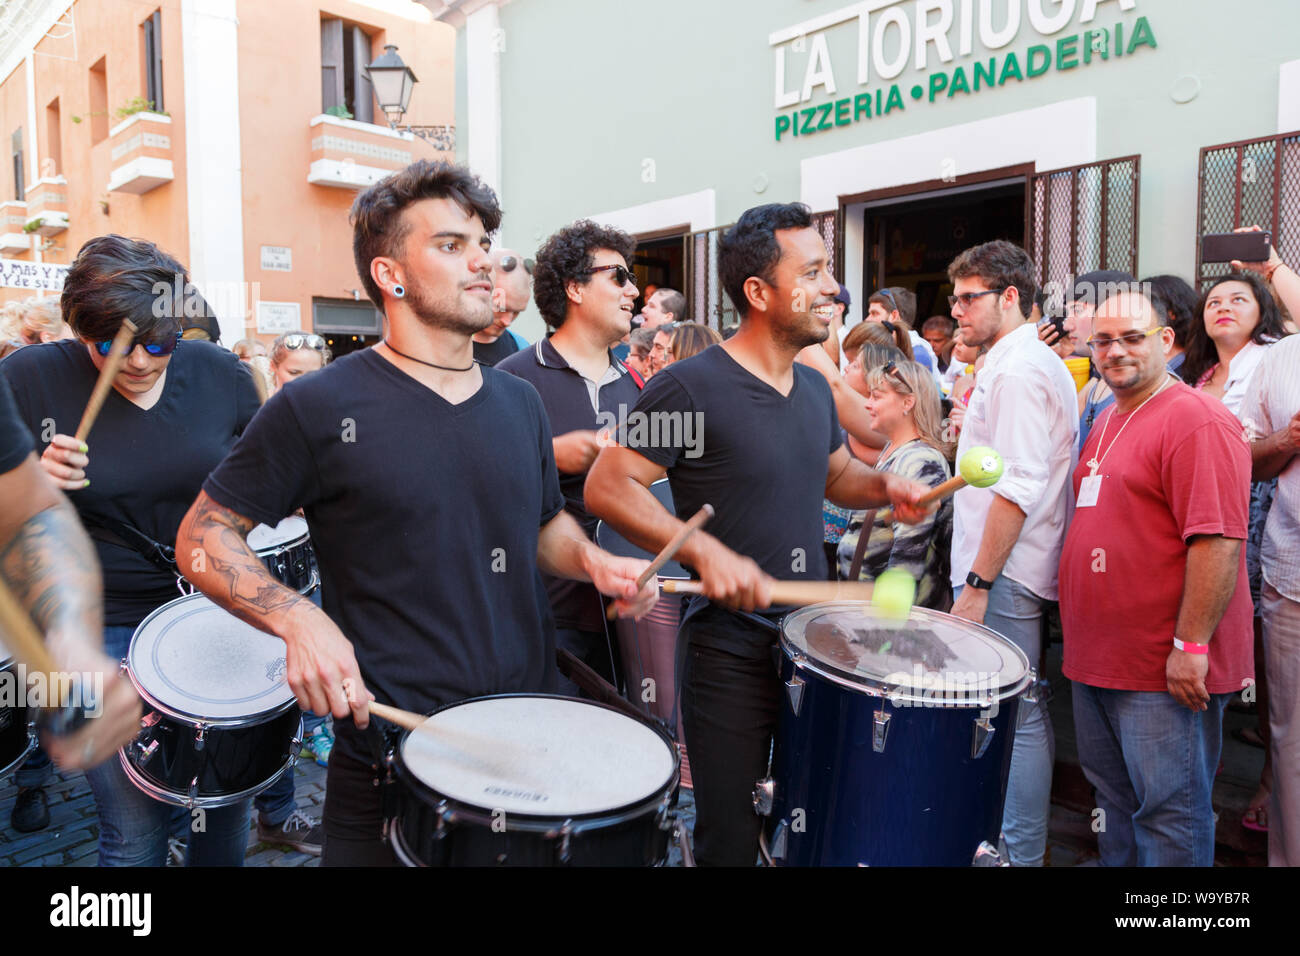 One of music groups entertains the crowd by drumming energetically and marching through the street of Old San Juan for San Sebastian Street Festival. Stock Photo